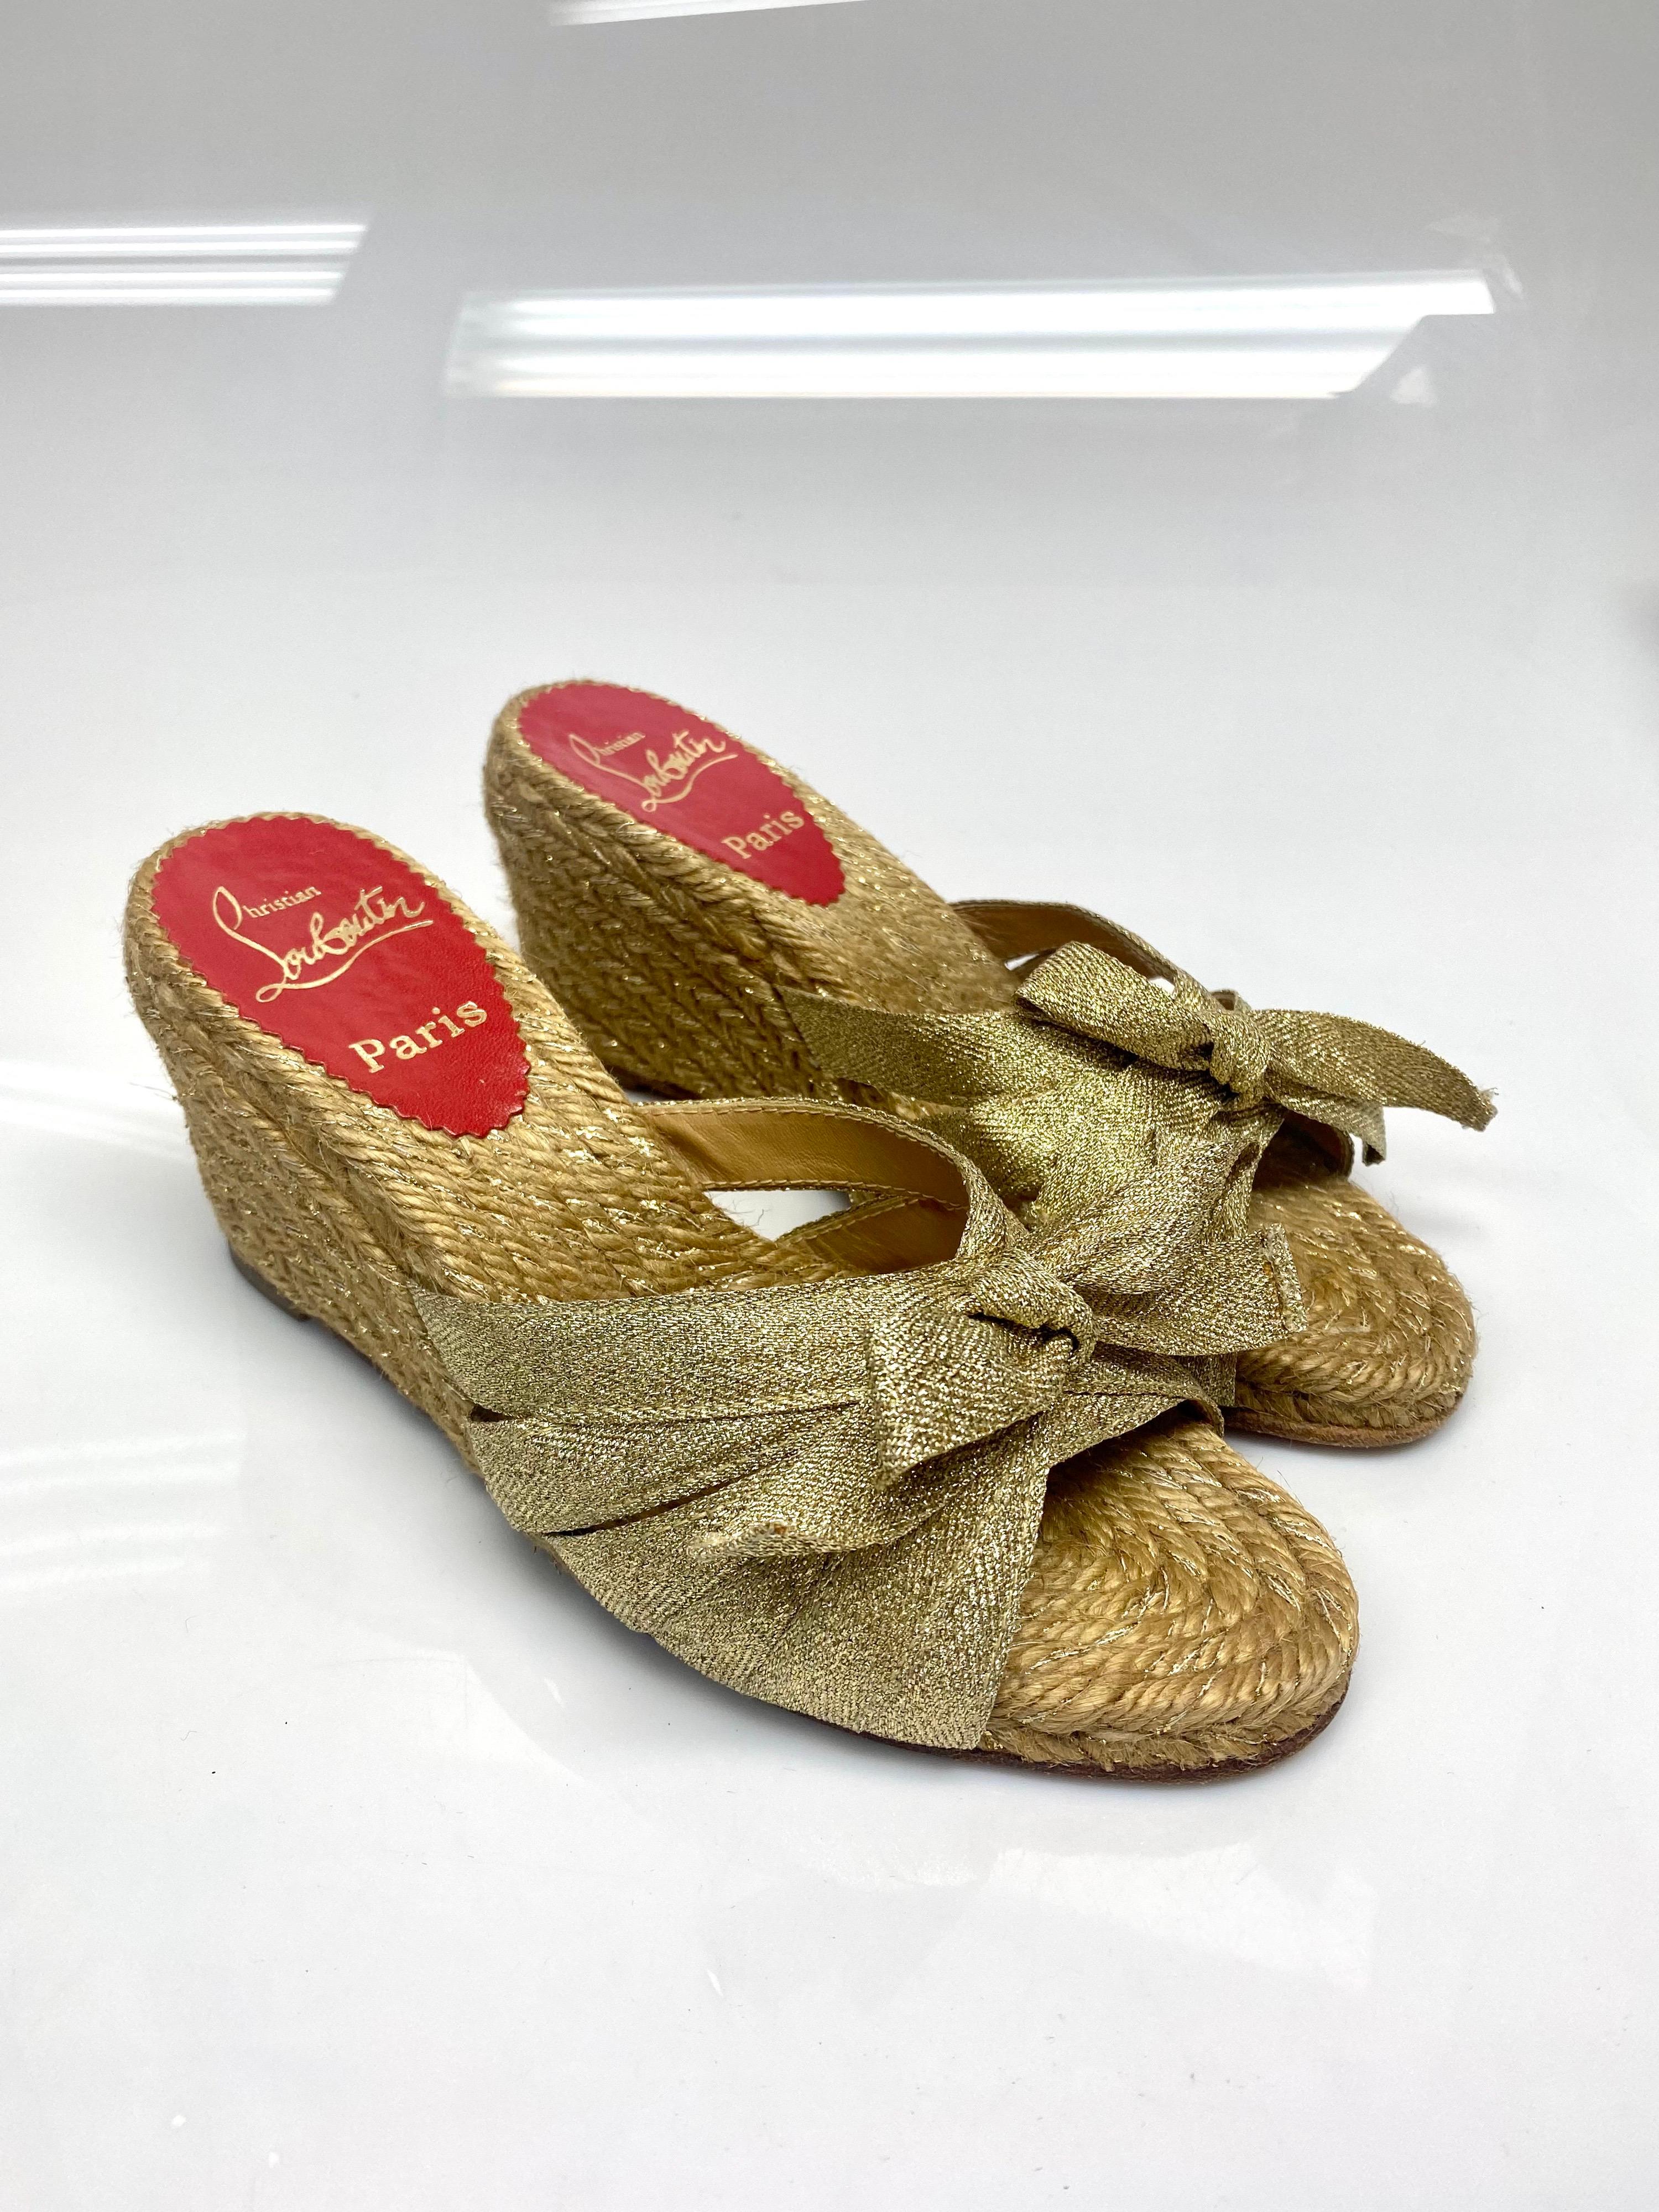 Christian Louboutin Gold Metallic Raffia Wedge Size 35. These beautiful wedges by Christian Louboutin will add some comfort and pizzazz to your outfit. Featuring gold metallic gros grain ribbon detailing with a knot tie in the front. Item is in good